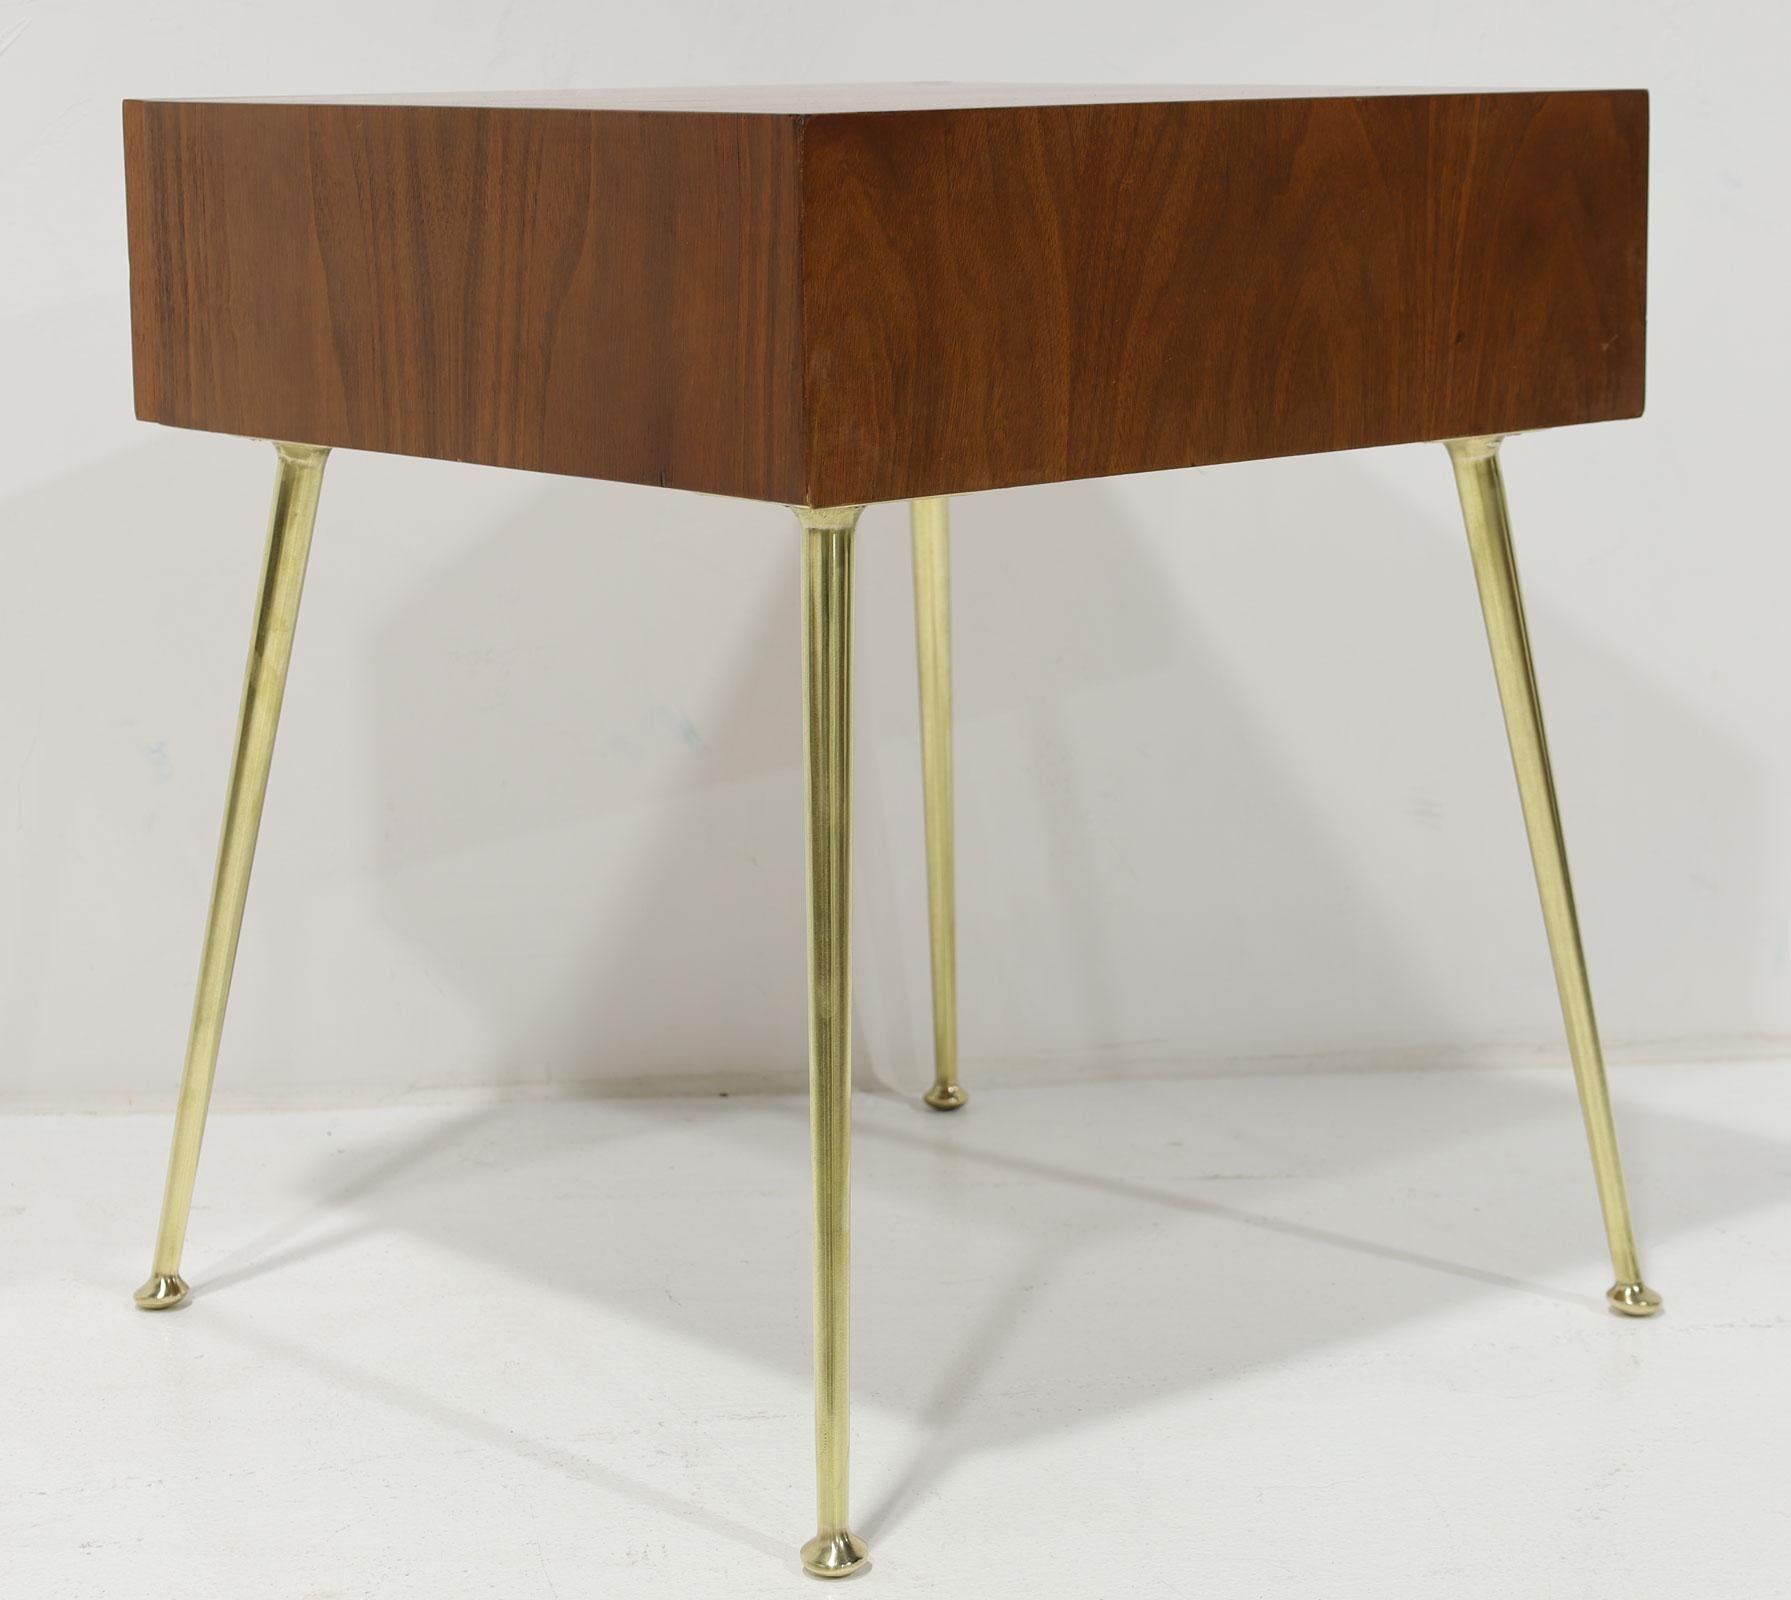 American Robsjohn-Gibbings for Widdicomb Side Table in Walnut, Brass and Cane, 1950s For Sale